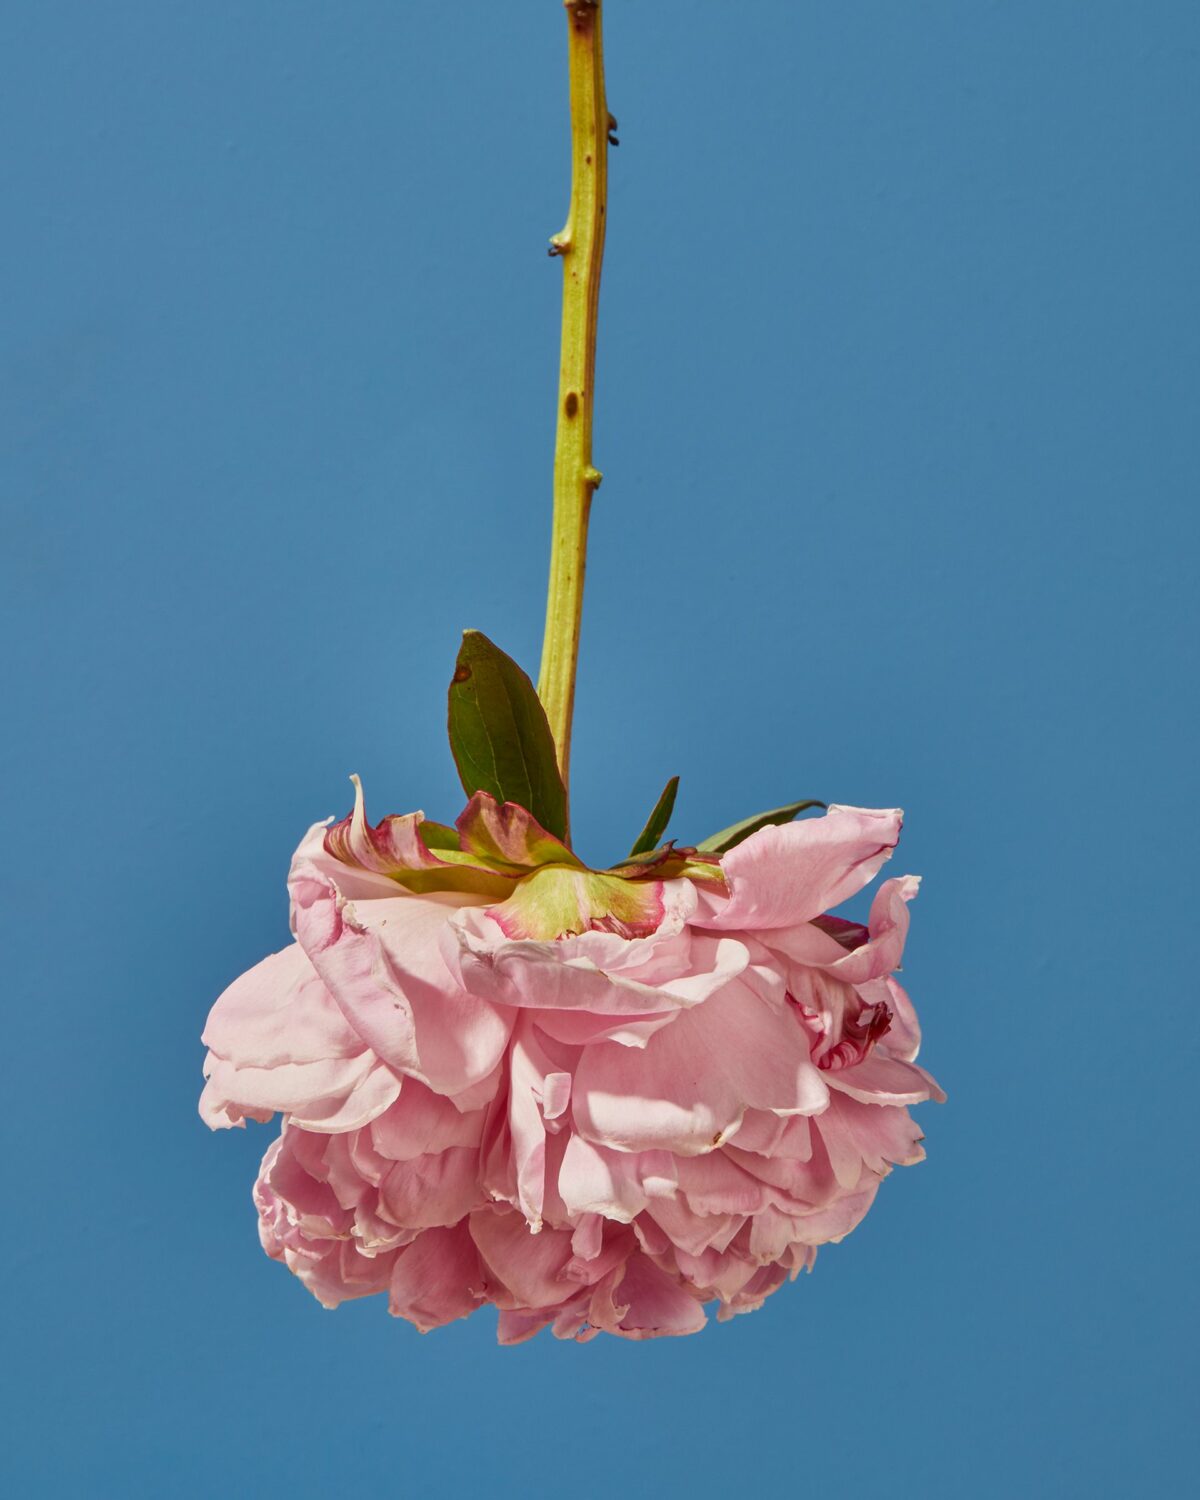 Upside Down Nature Superb Flower Photography Series By Magali Polverino And Pato Katz 5